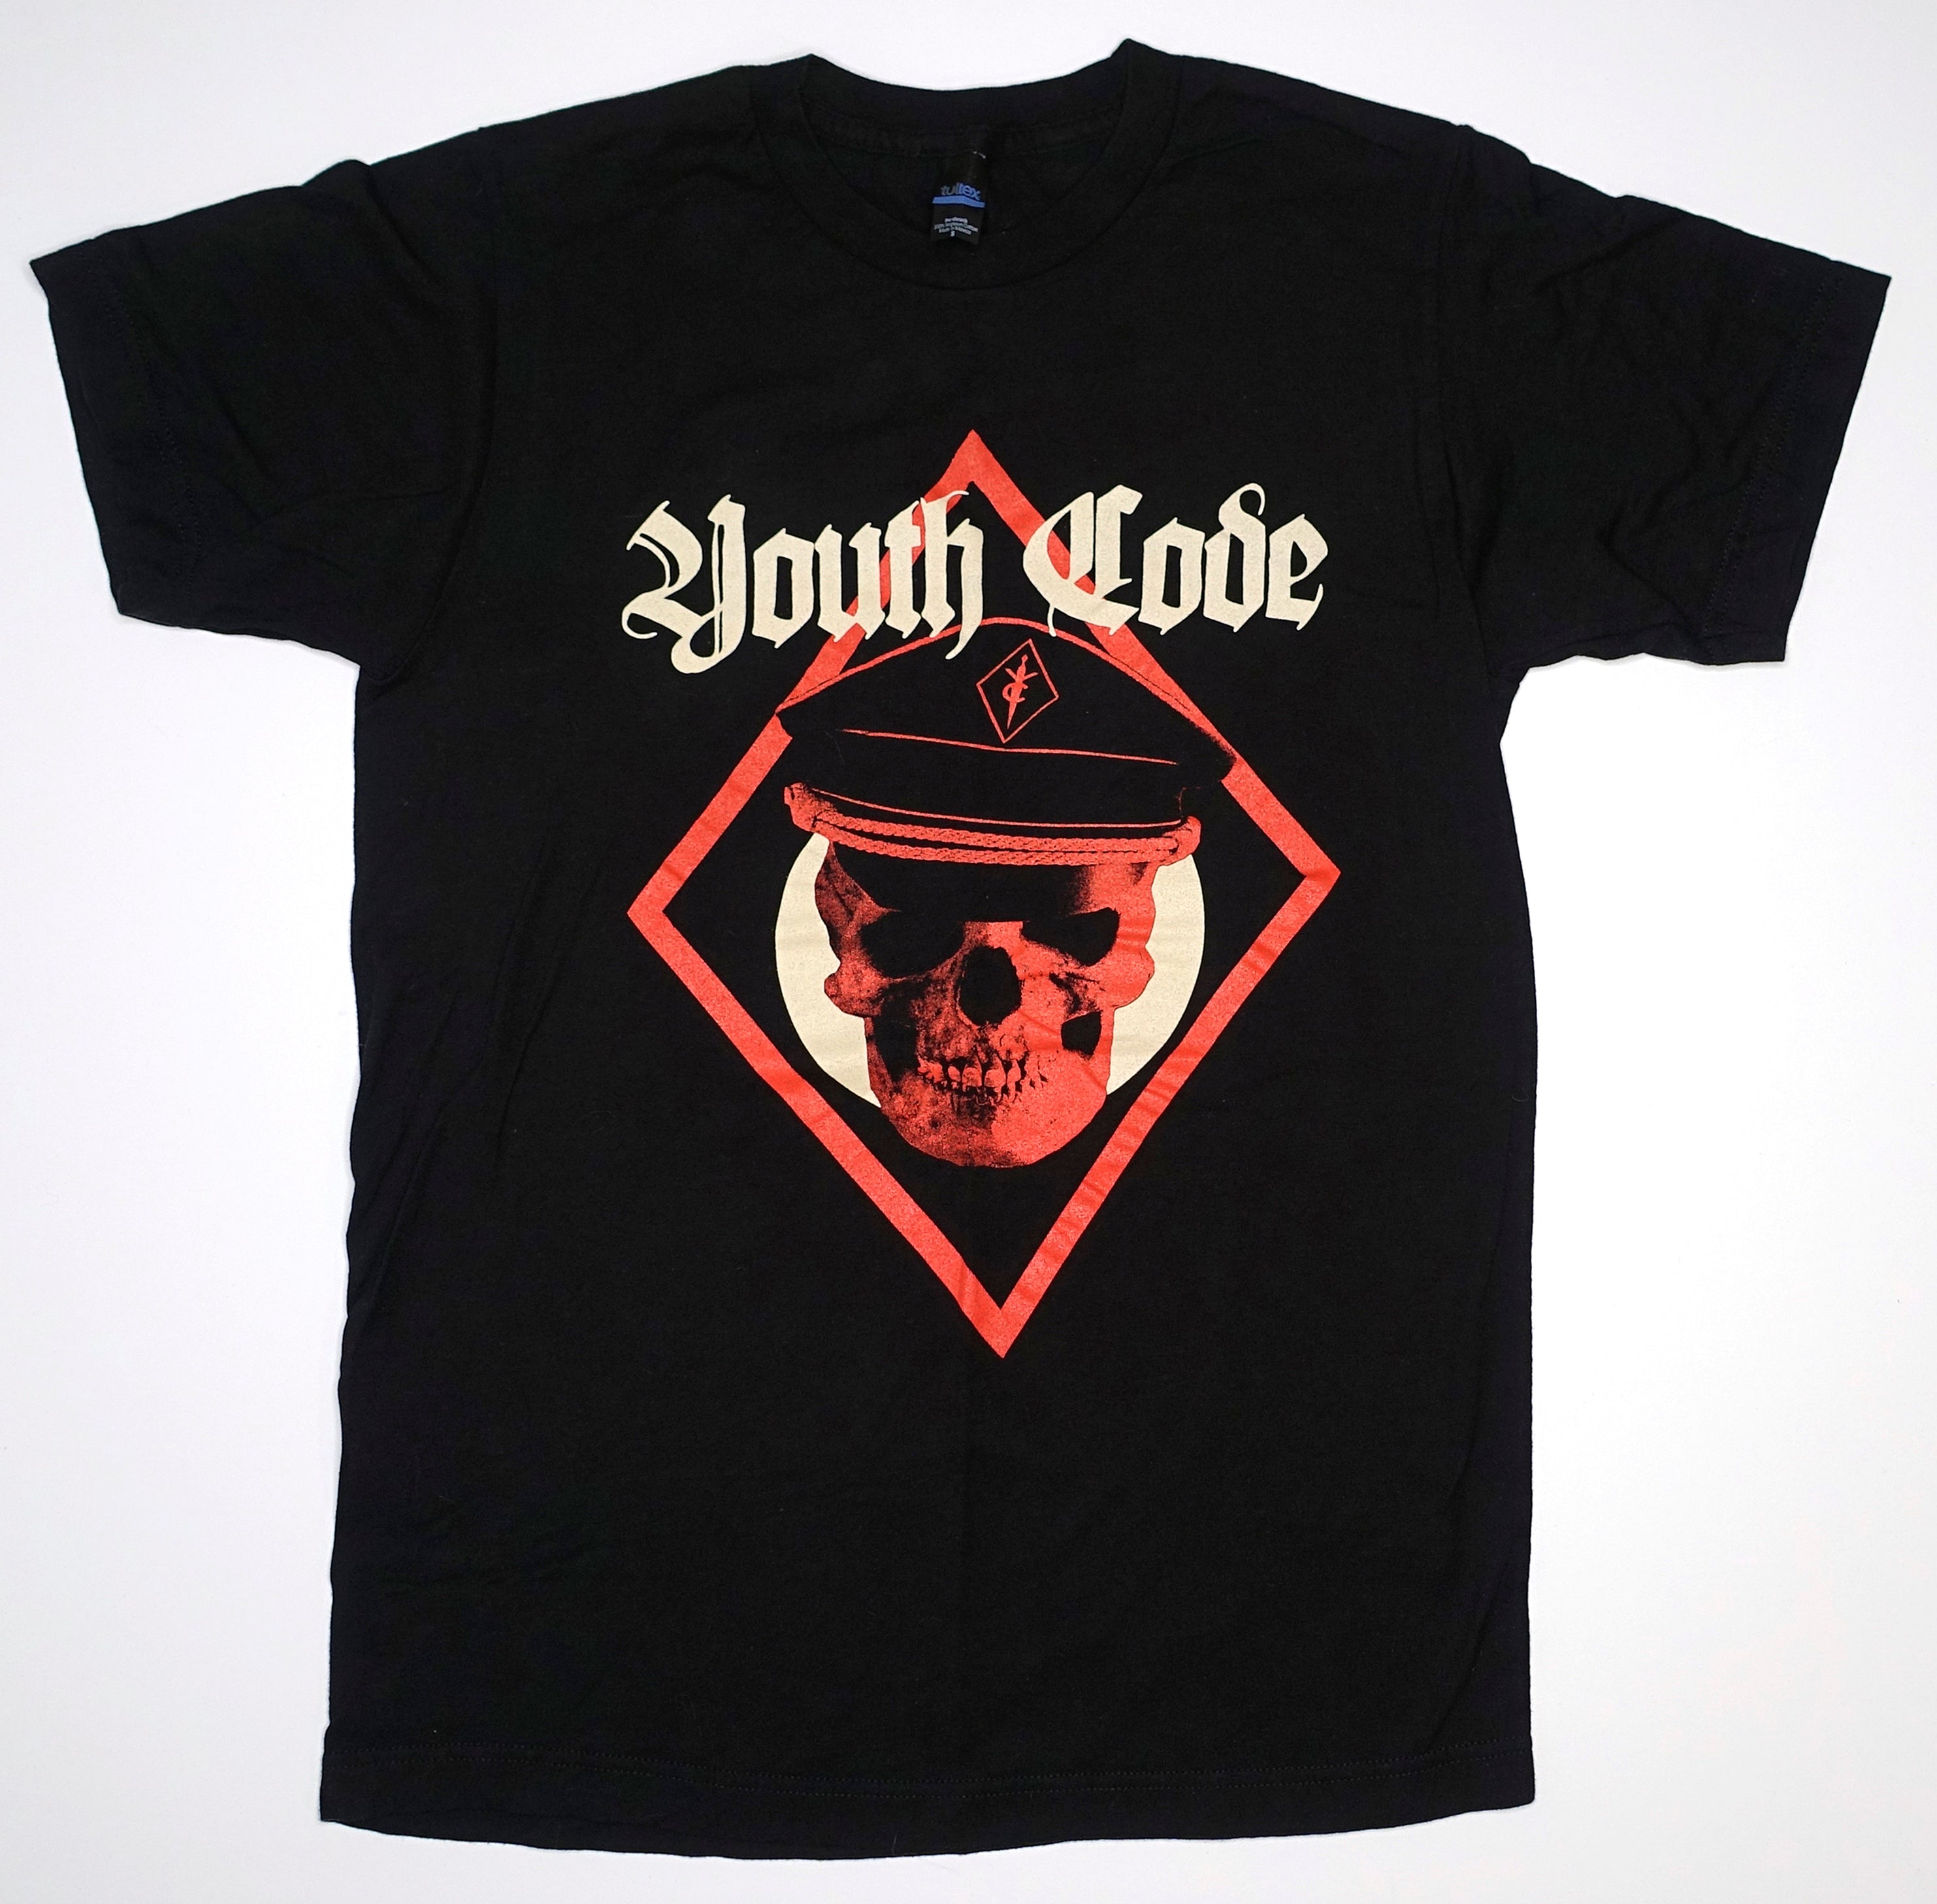 Youth Code – Skull With Cap Tour Shirt Size Small